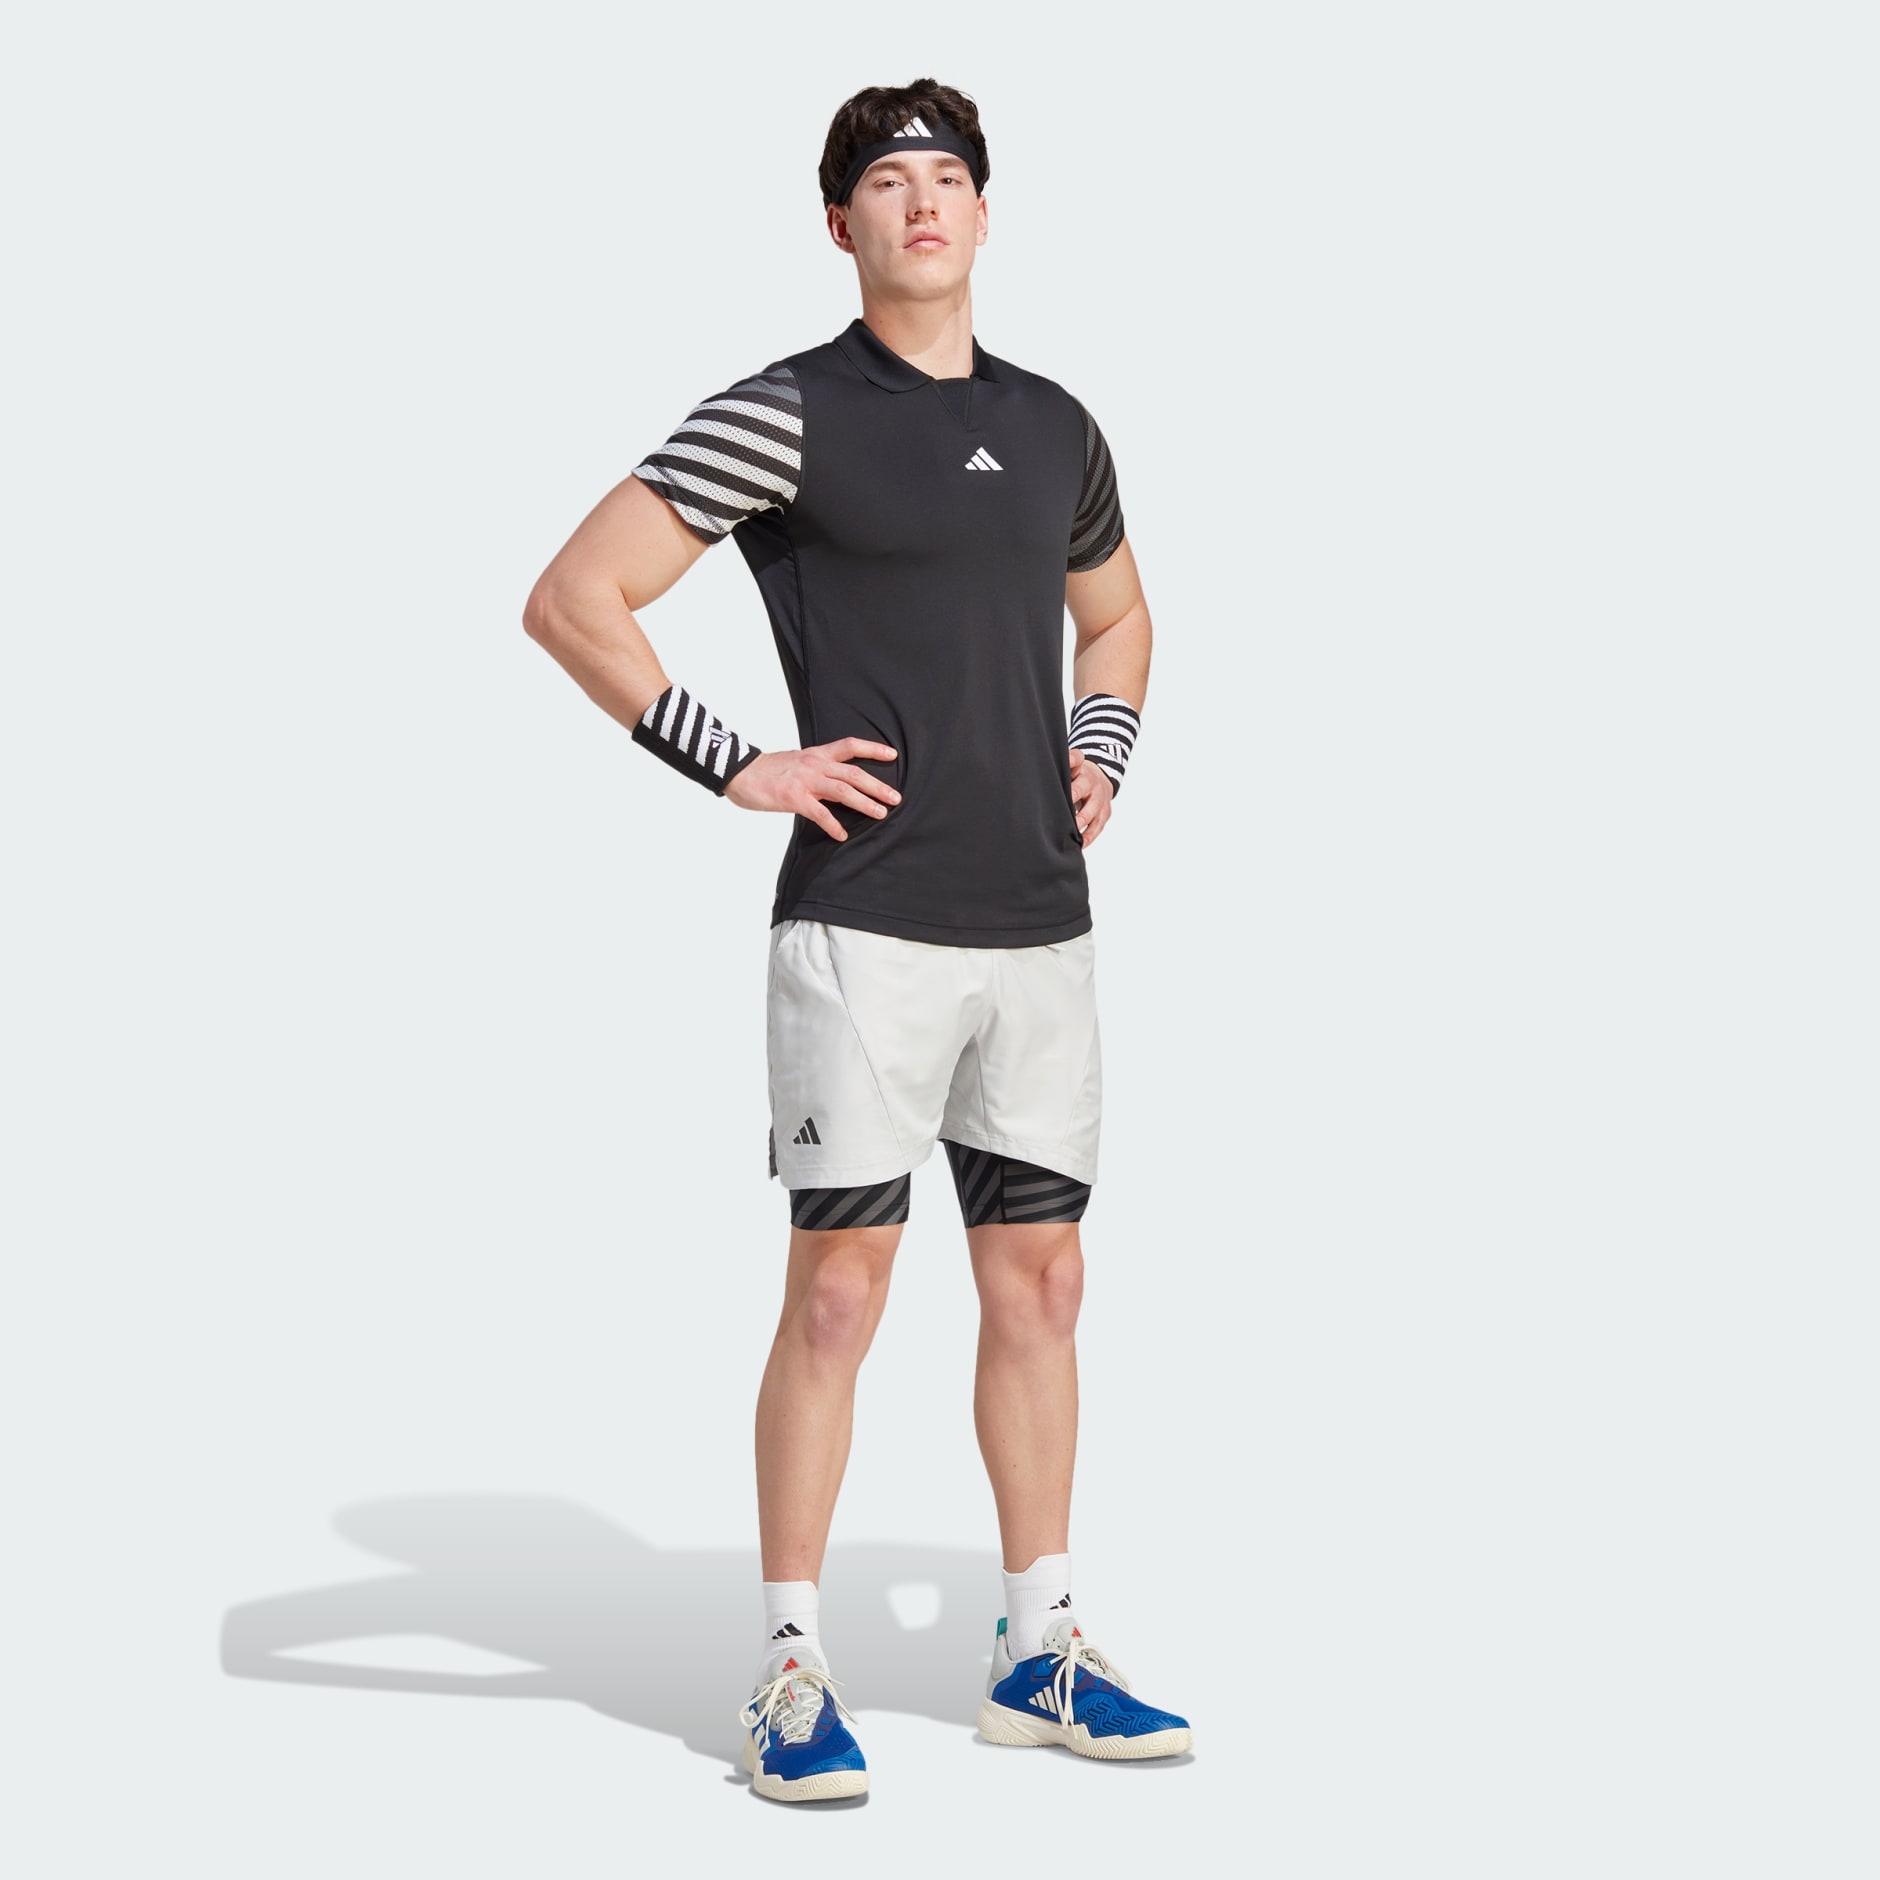 Clothing - Tennis AEROREADY Two-in-One Pro Shorts - Grey | adidas South ...